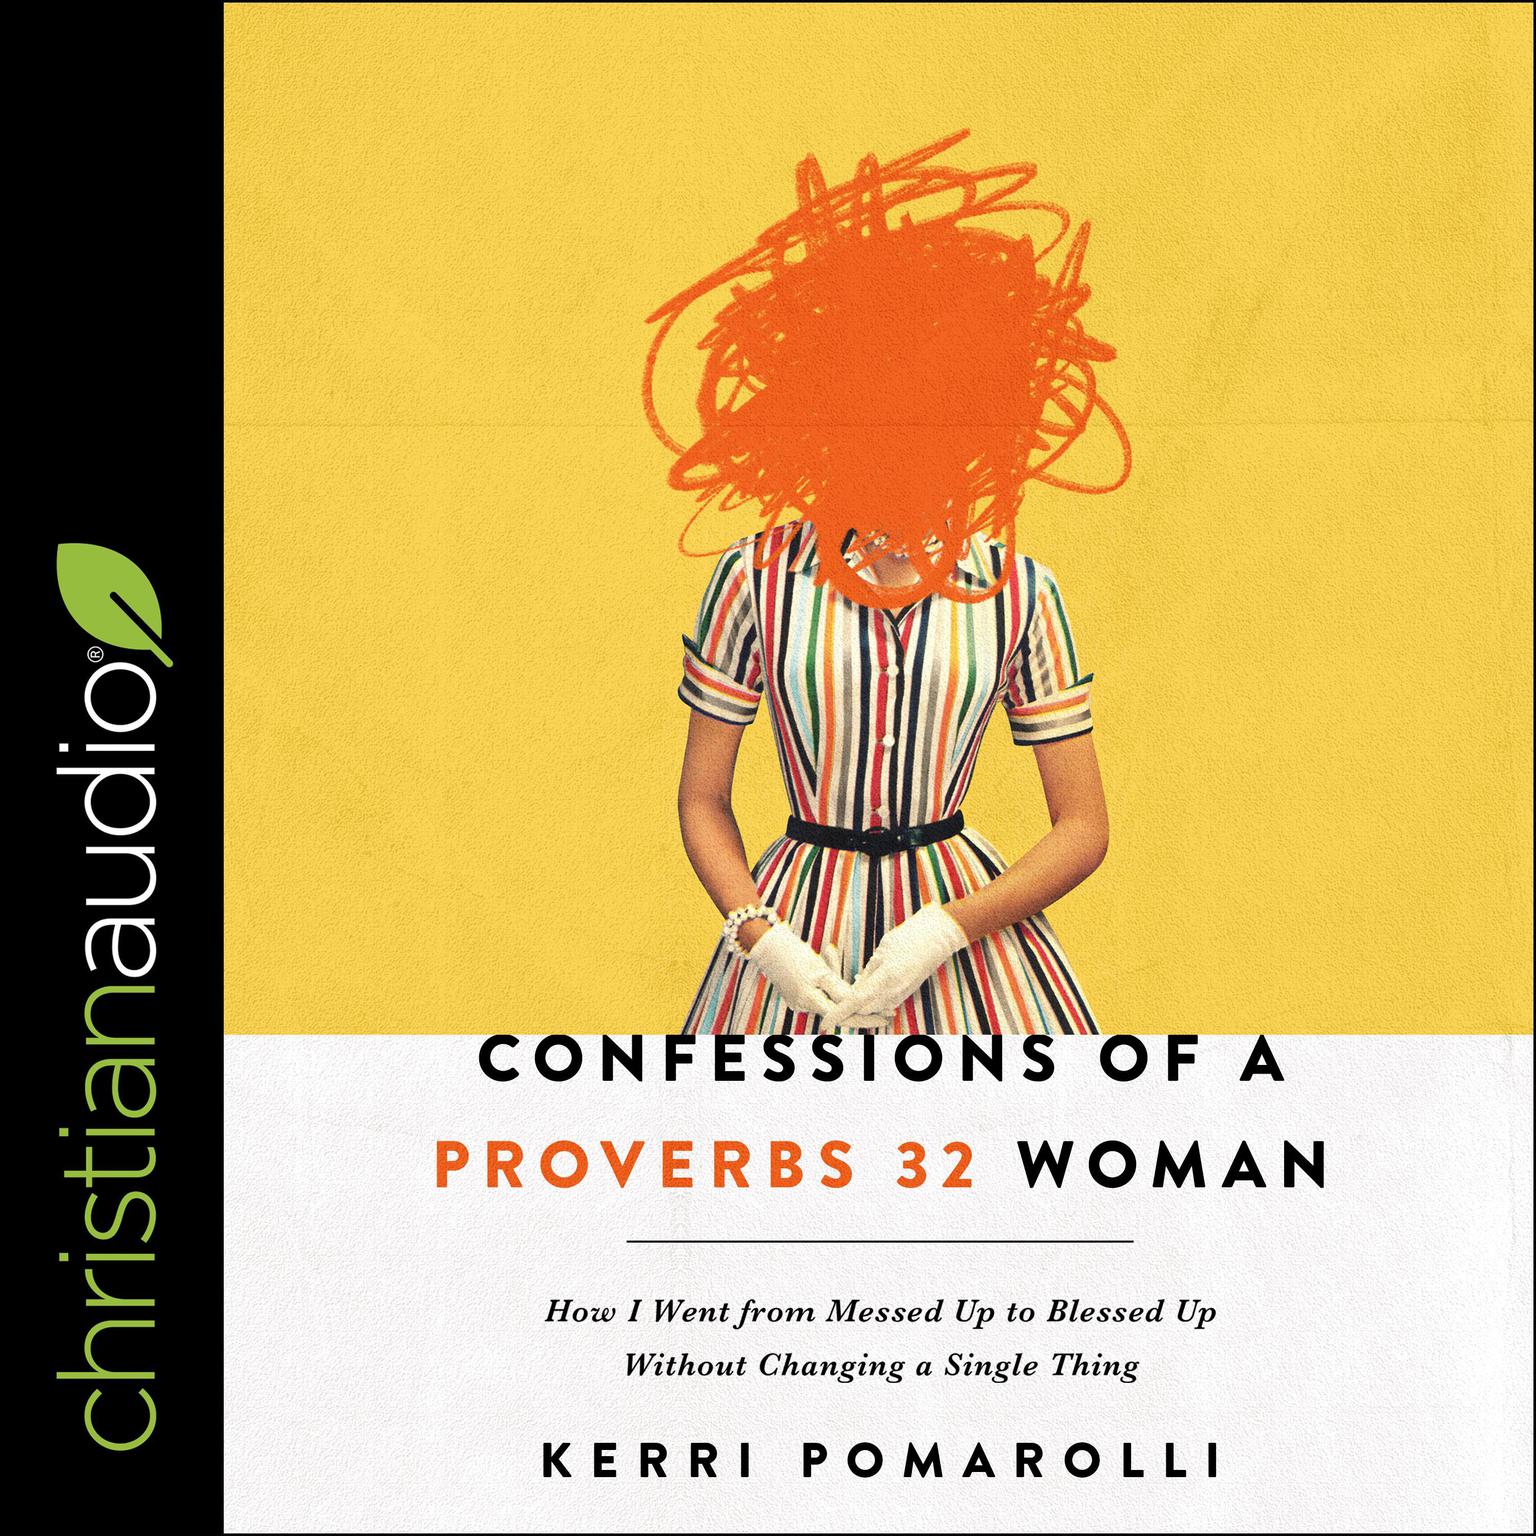 Confessions of a Proverbs 32 Woman: How I Went from Messed Up to Blessed Up Without Changing a Single Thing Audiobook, by Kerri Pomarolli